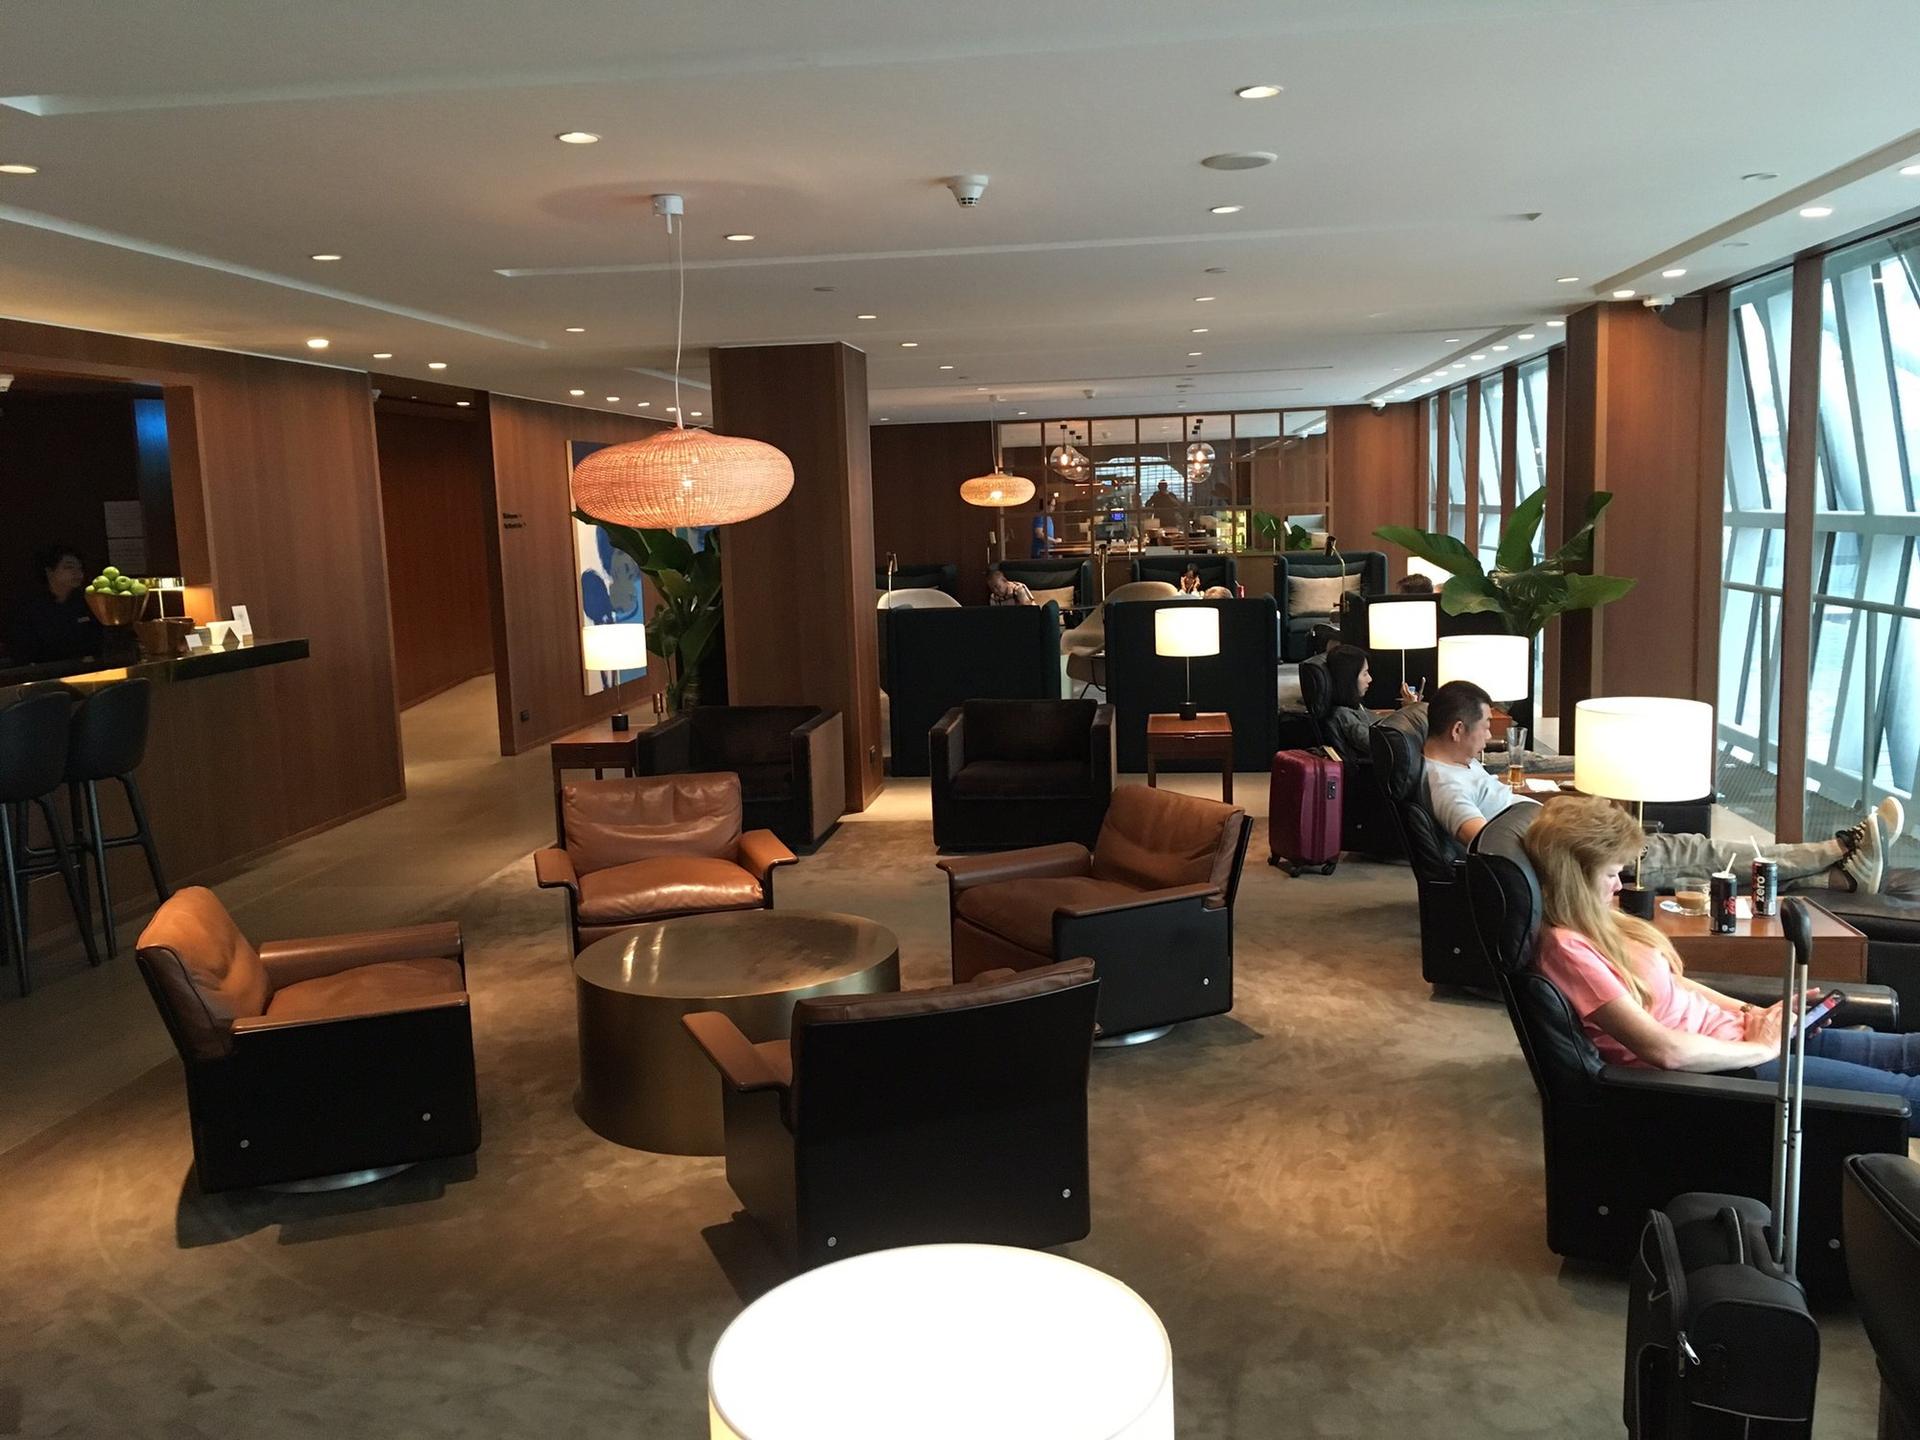 Cathay Pacific First and Business Class Lounge image 62 of 69